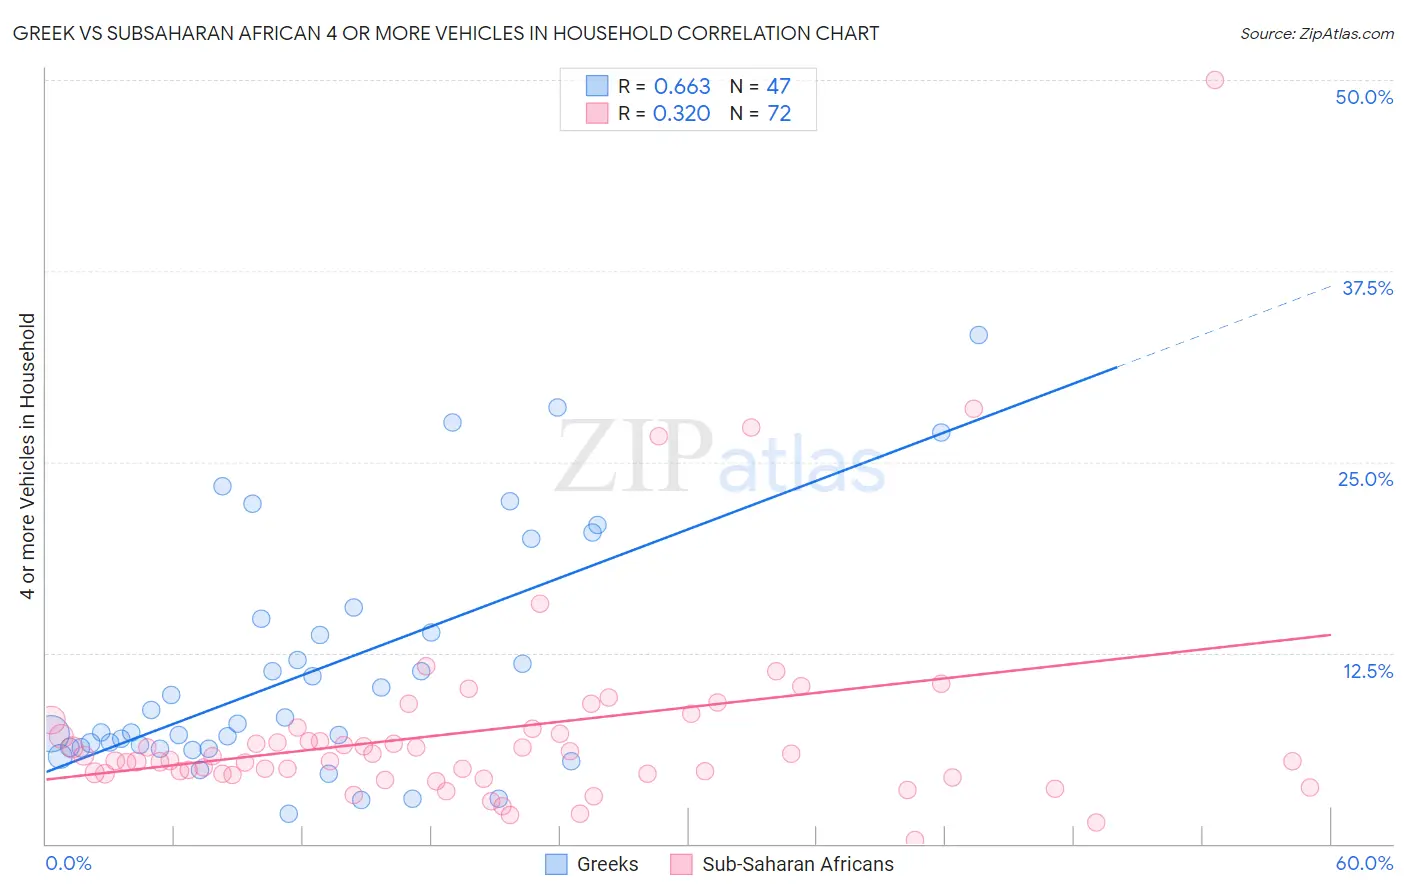 Greek vs Subsaharan African 4 or more Vehicles in Household